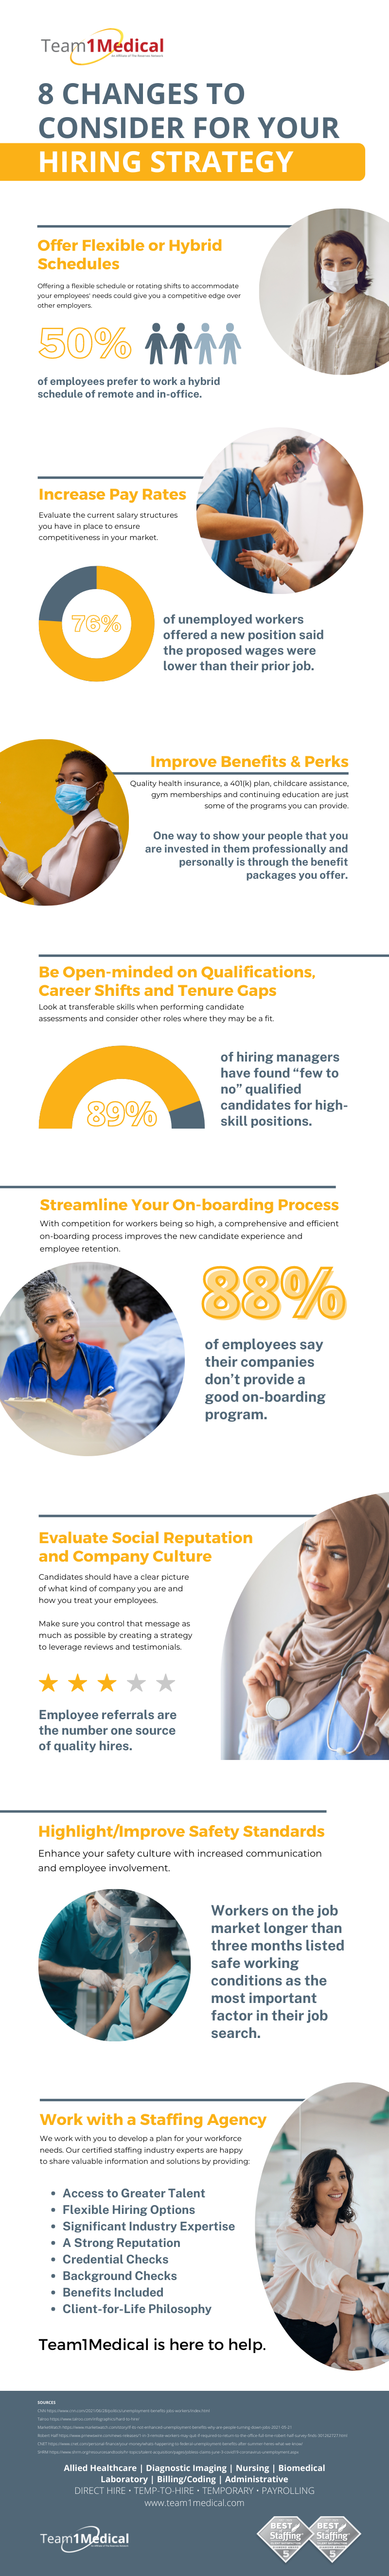 infographic-8 changes for hiring